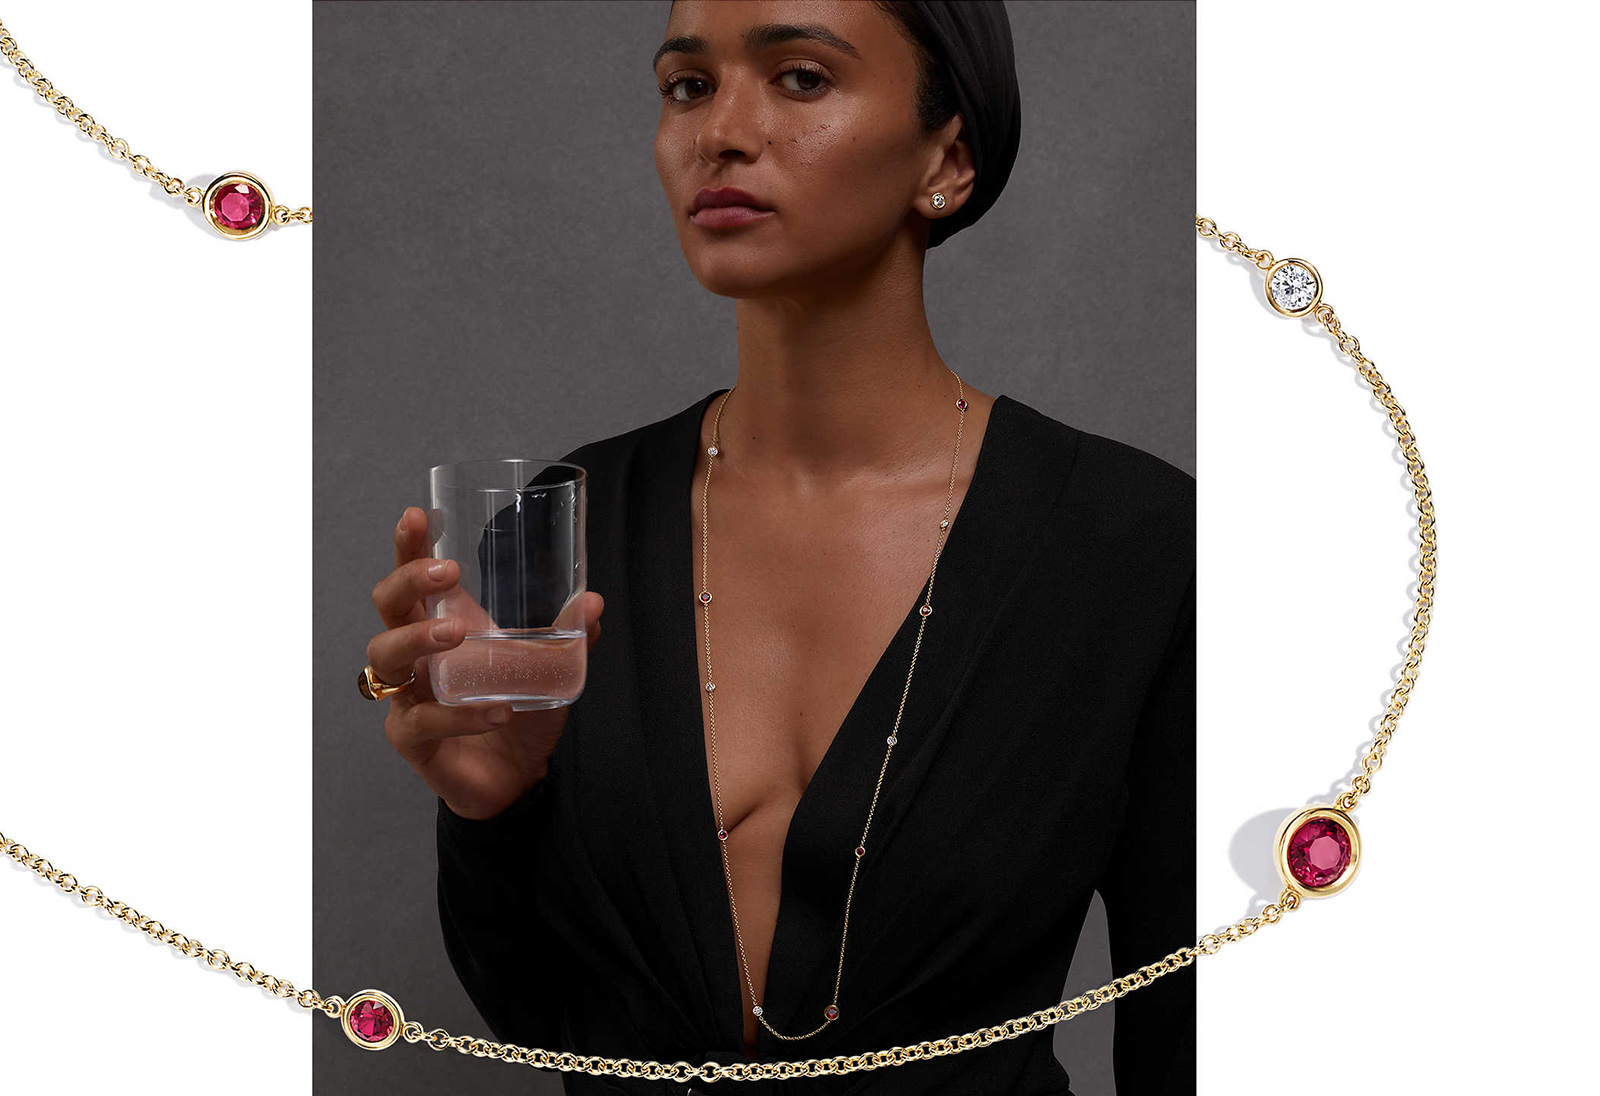 Elsa Peretti Colour by the Yard necklace with bezel-set rubies in yellow gold, styled by Kate Young for Tiffany & Co.